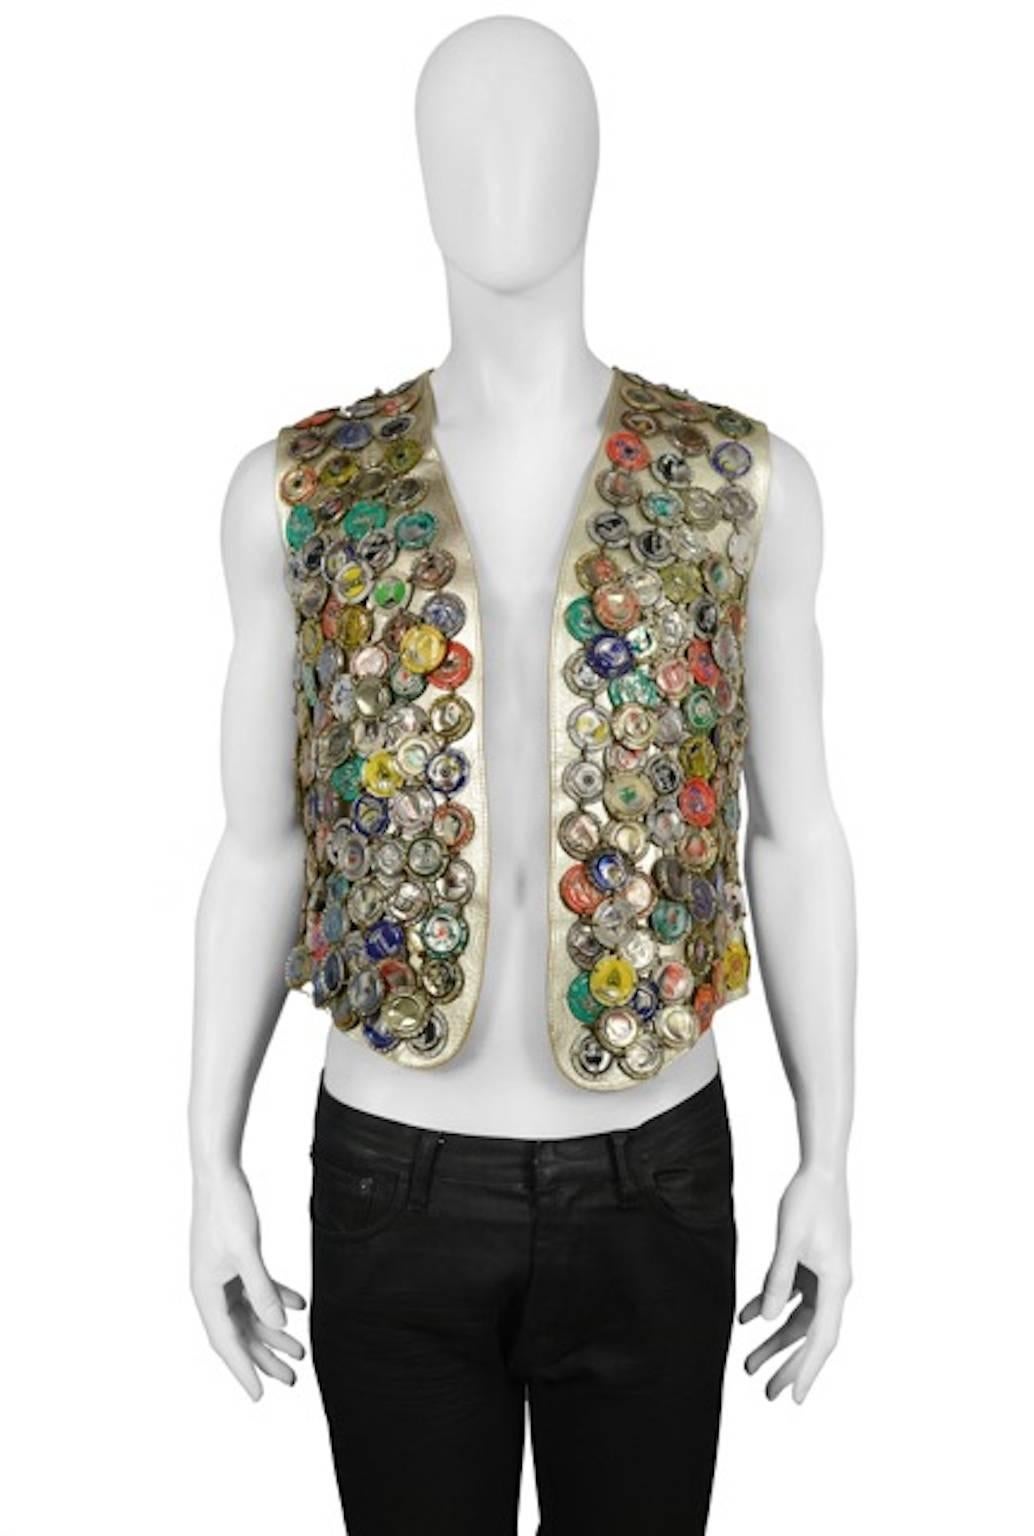 Vintage Maison Martin Margiela Artisanal Bottle Cap Vest. Bottle caps smashed and flattened by hand and embedded in resin before being linked and applied to leather. 20 hours to produce. Runway piece from the men's Spring / Summer 2006 Collection.